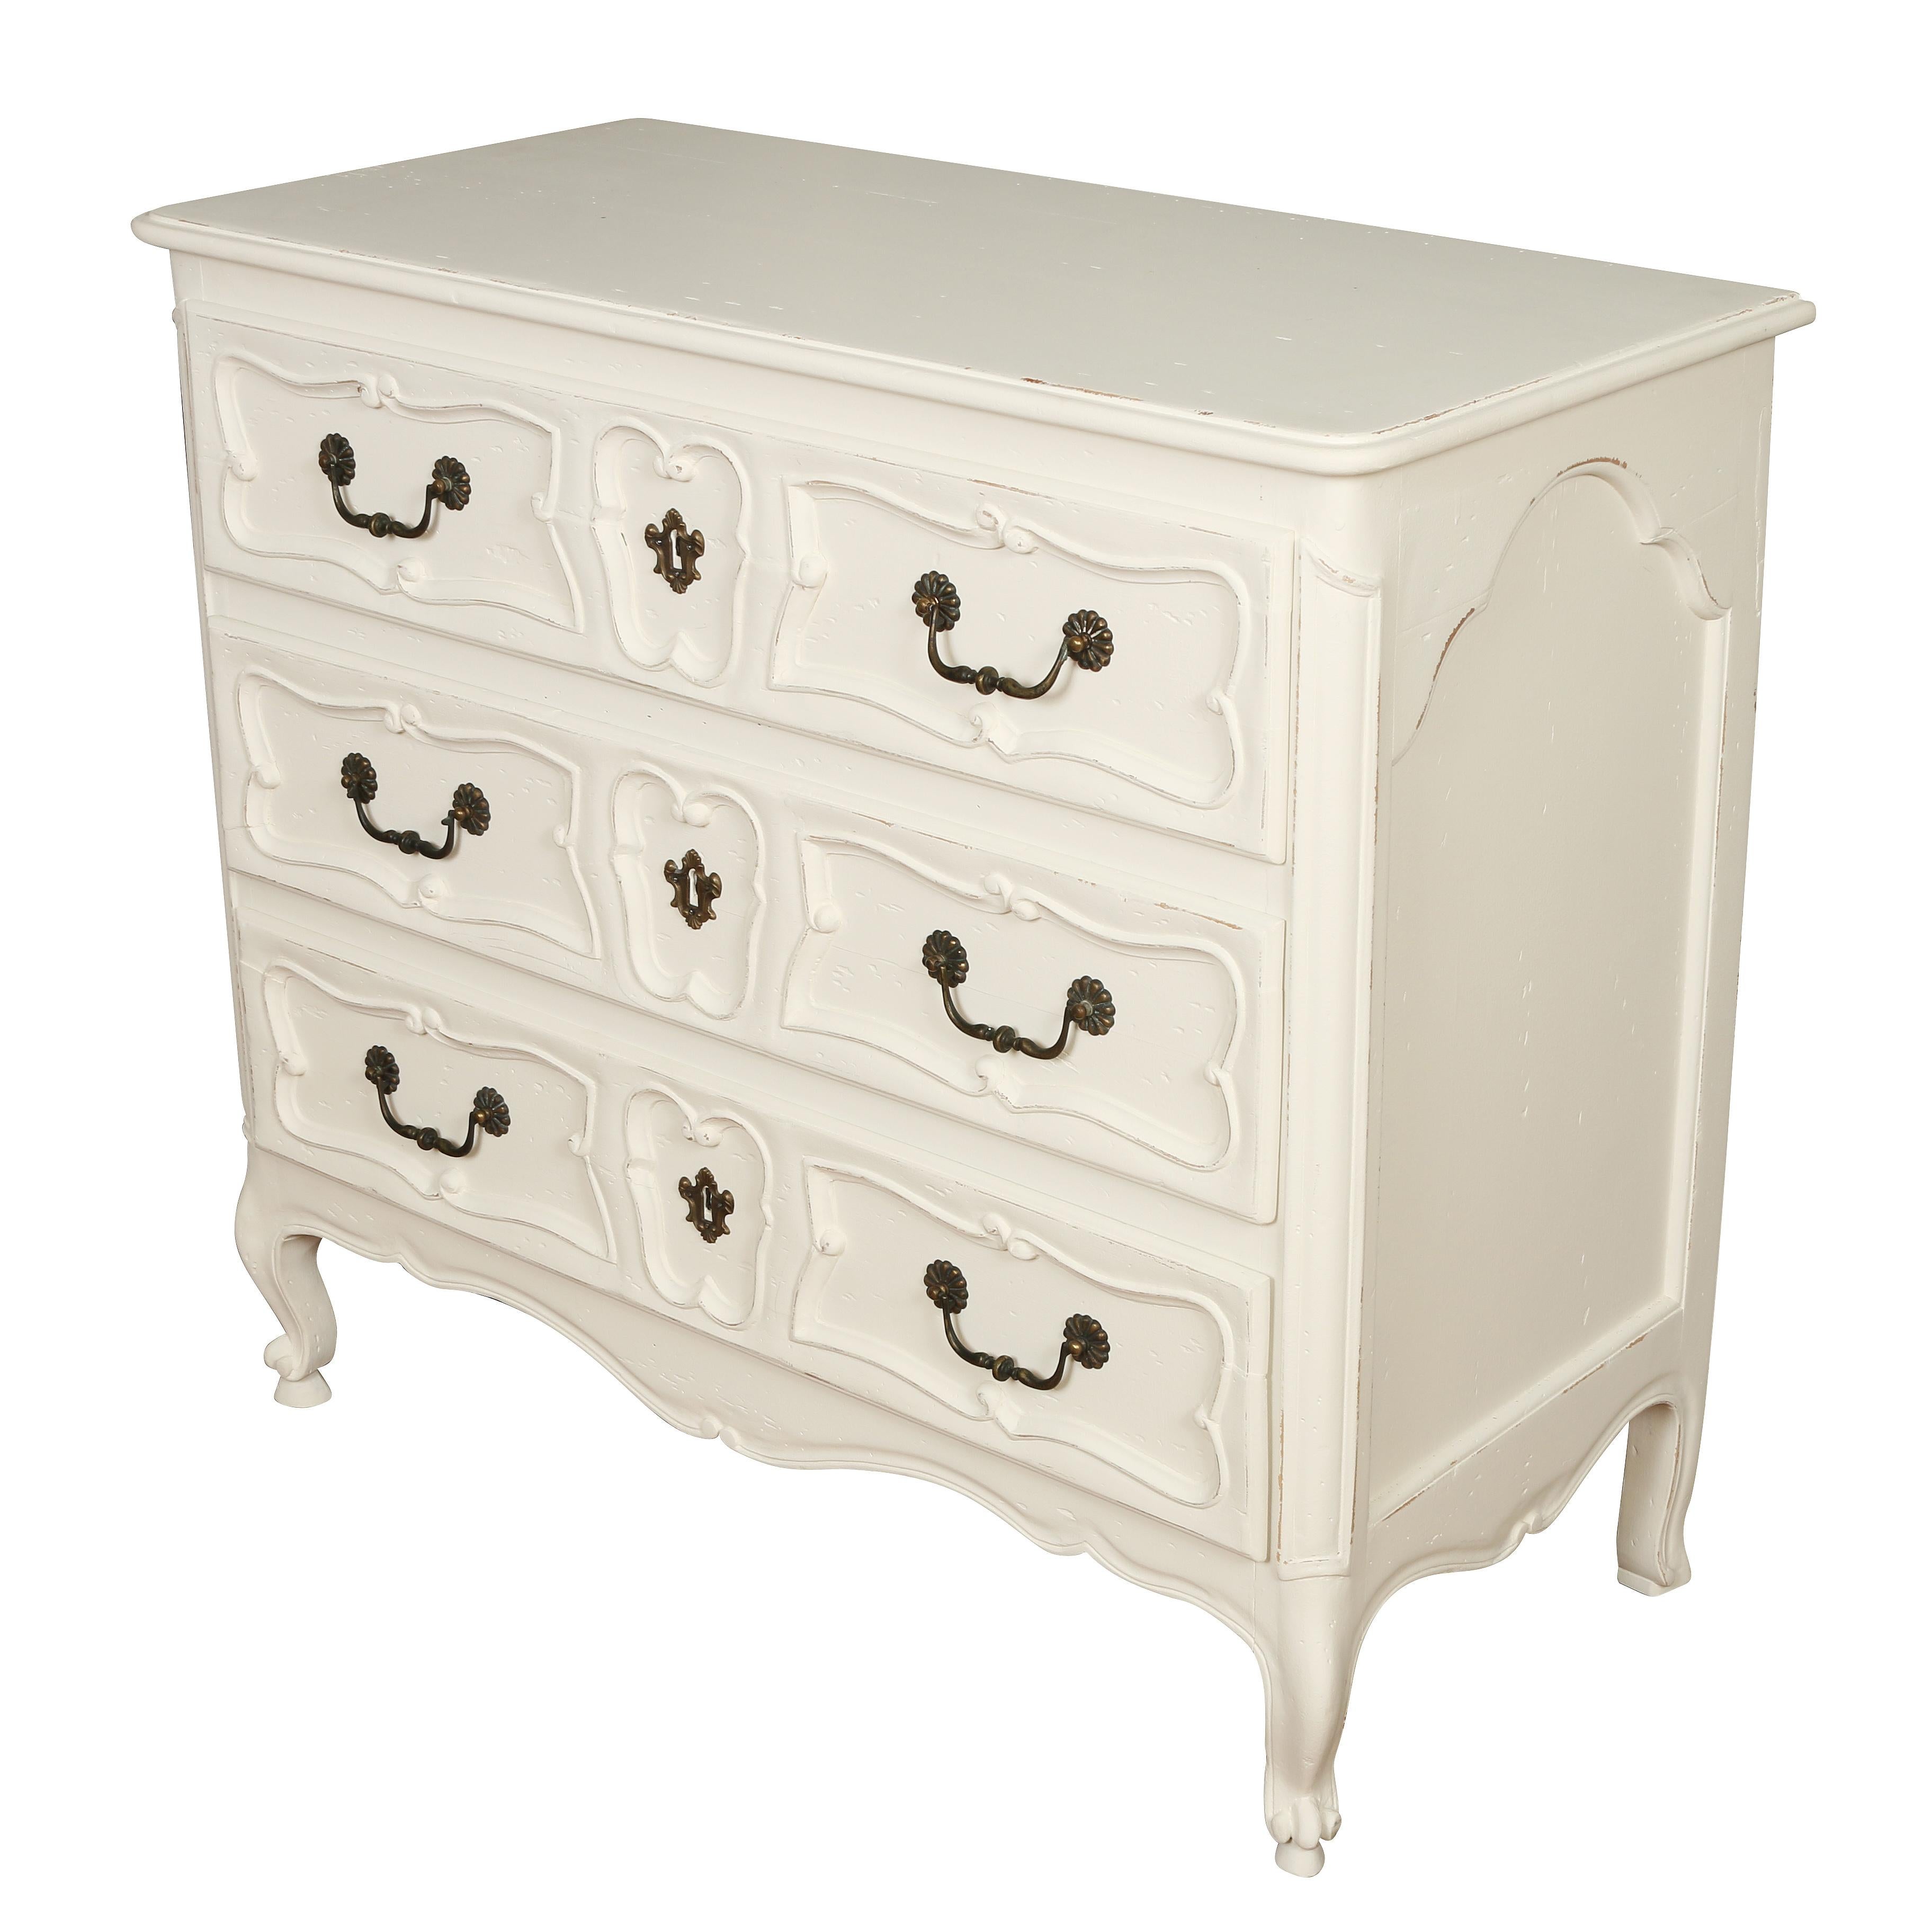 Louis XV style French commode painted white. Three drawers with bail pulls and carved wood details.